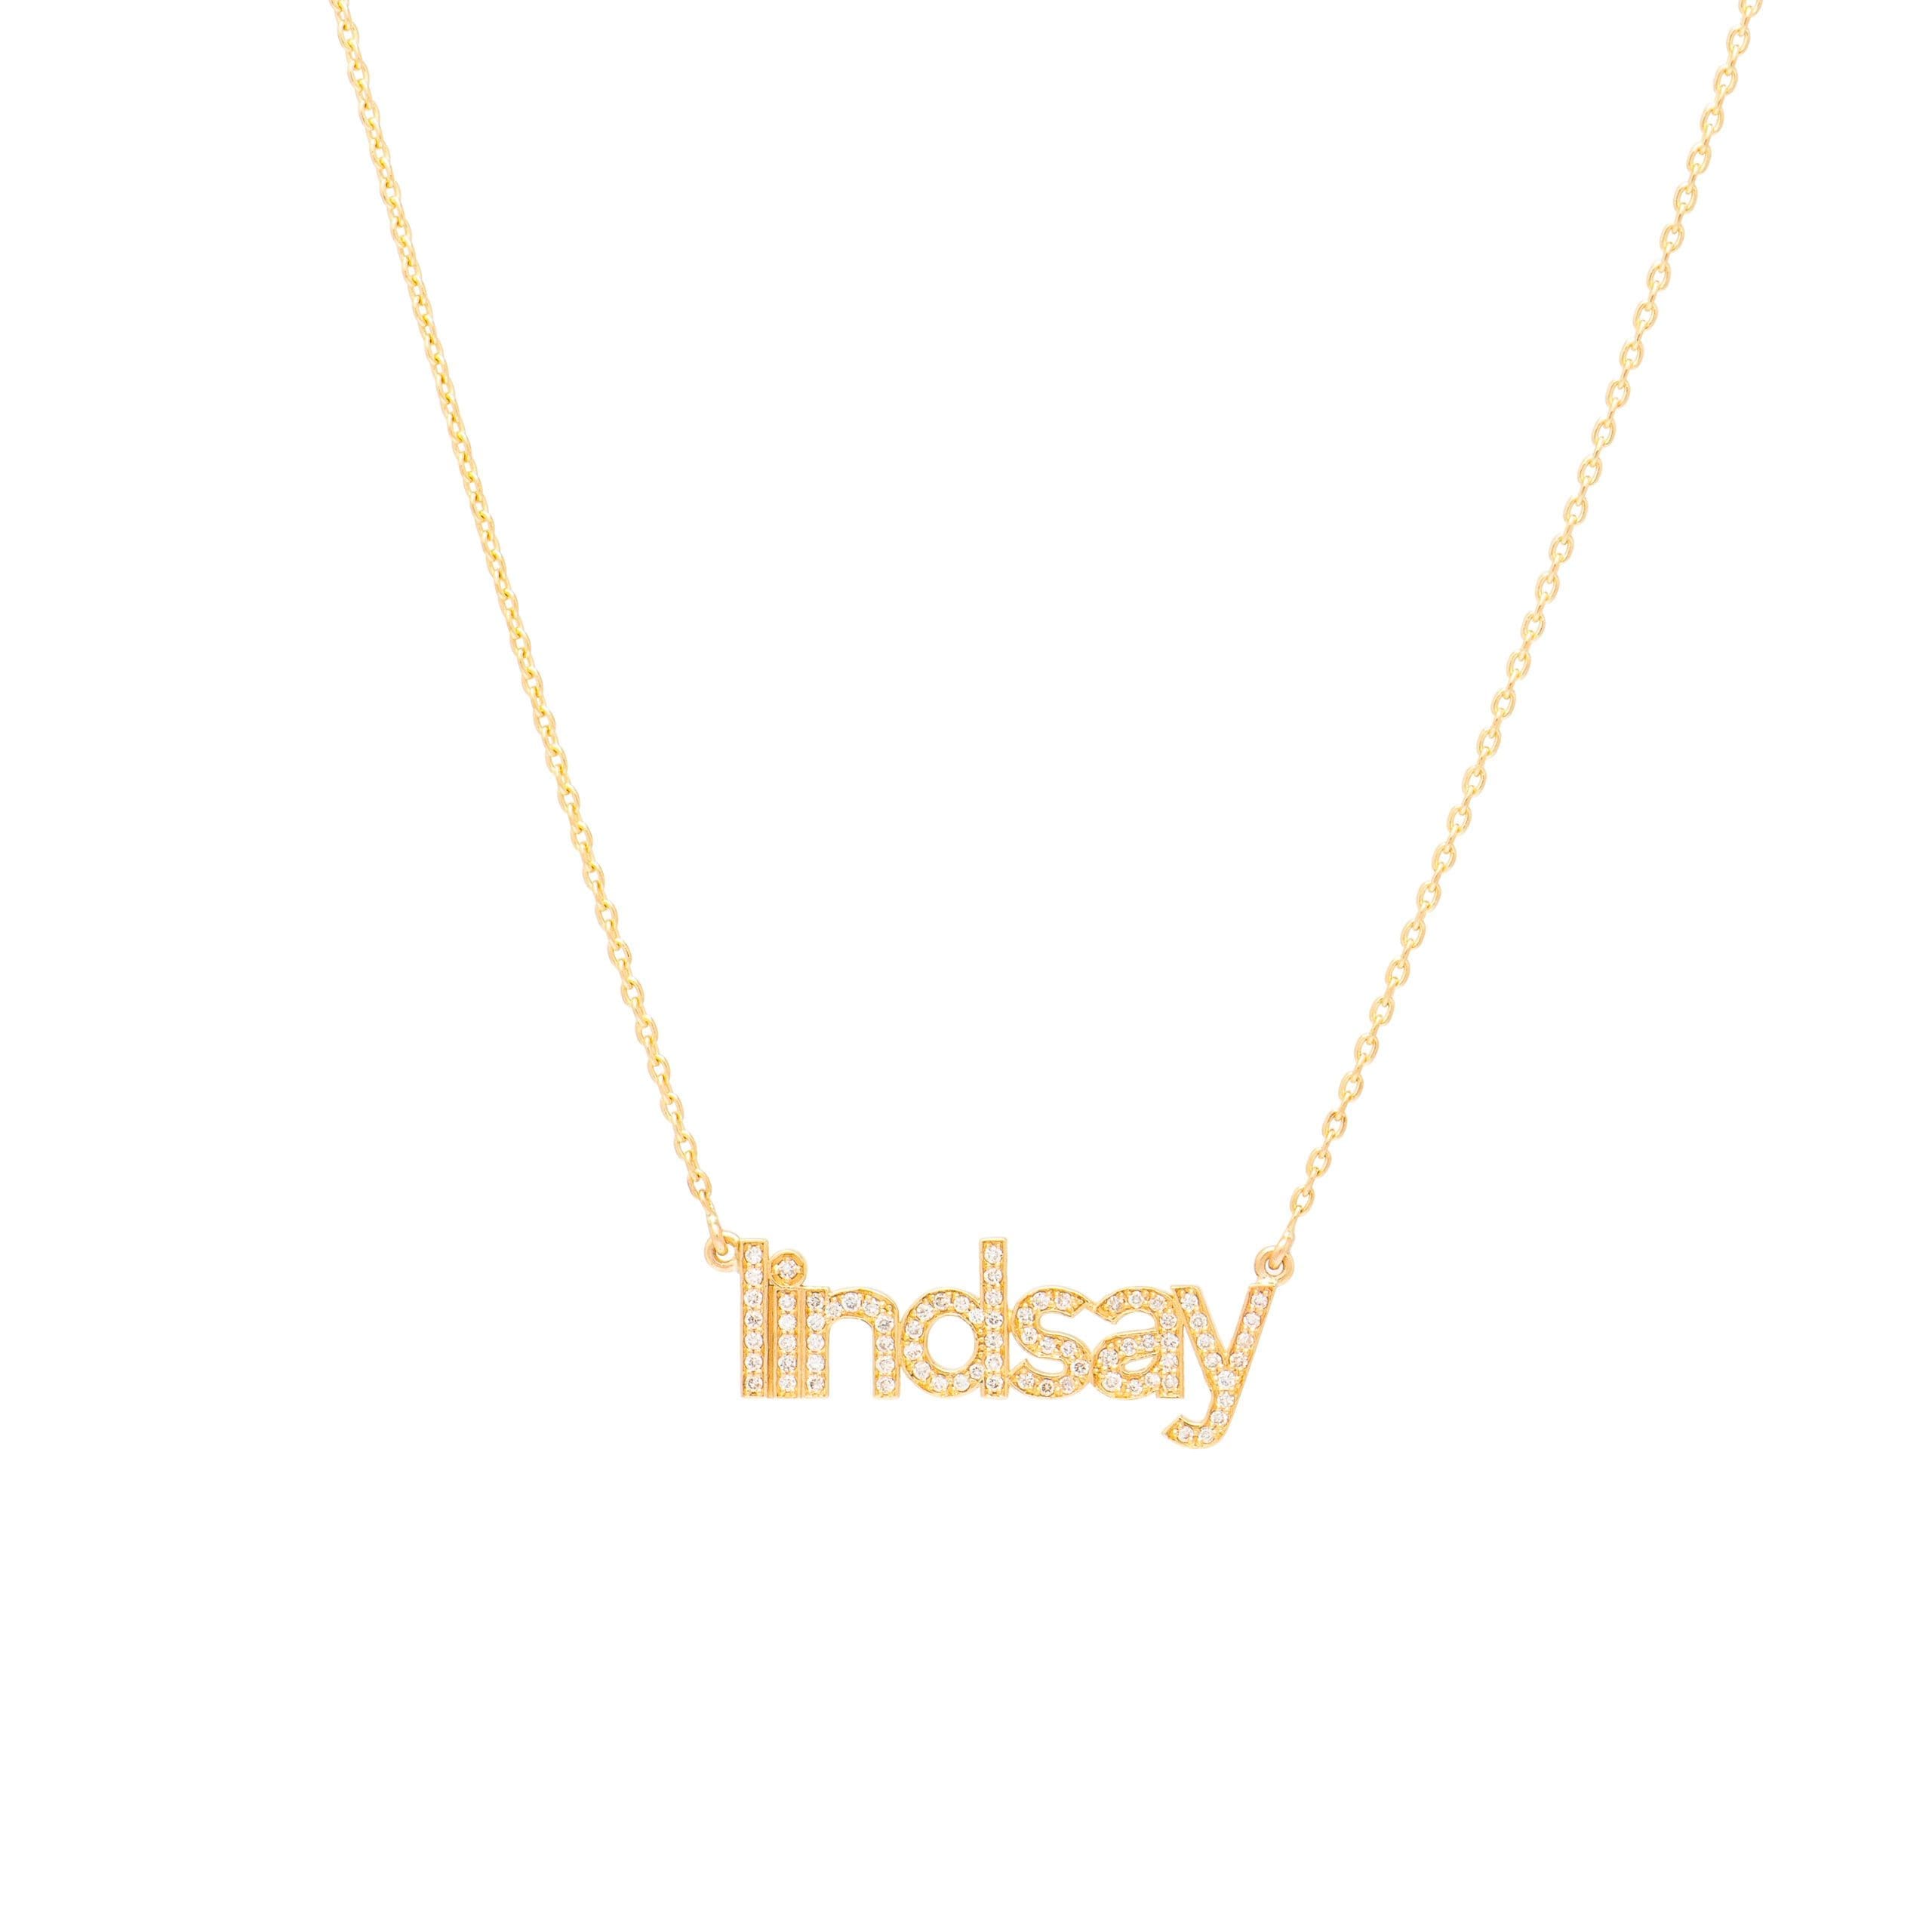 Diamond Lowercase Block Letter Name Necklace Yellow Gold